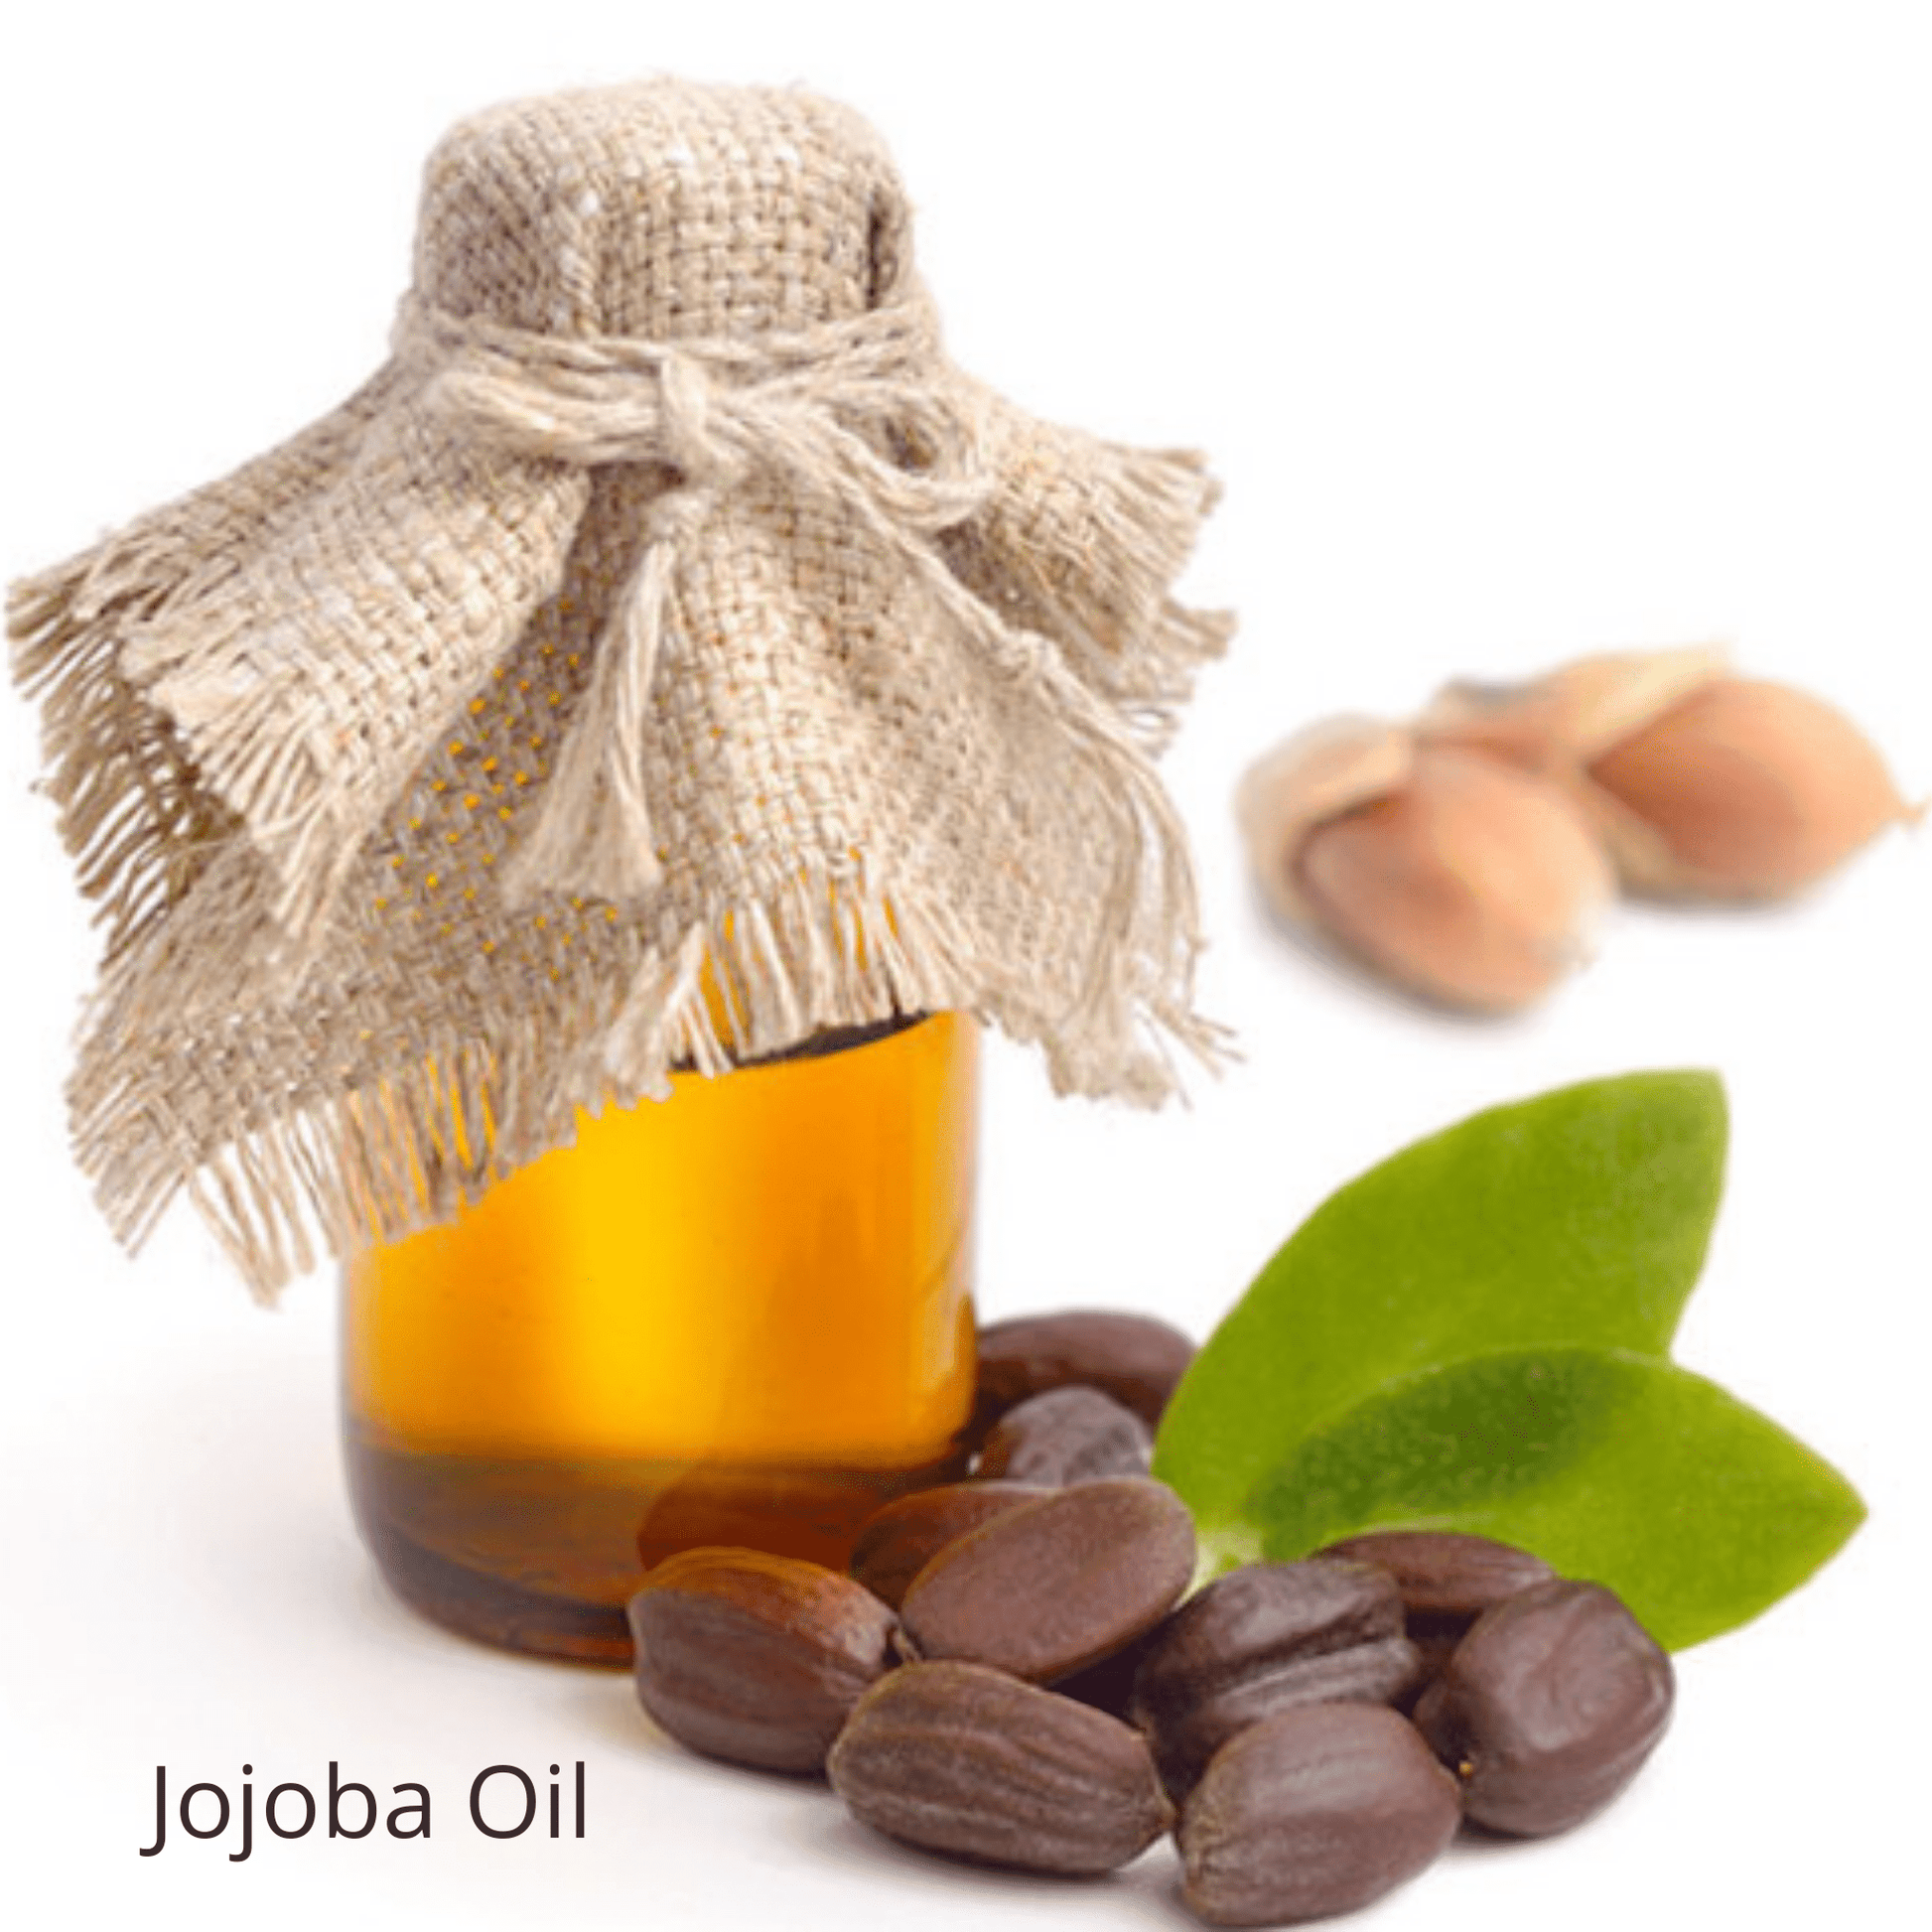 jojoba oil in Be Green Bath and Body Body Lotion Trial